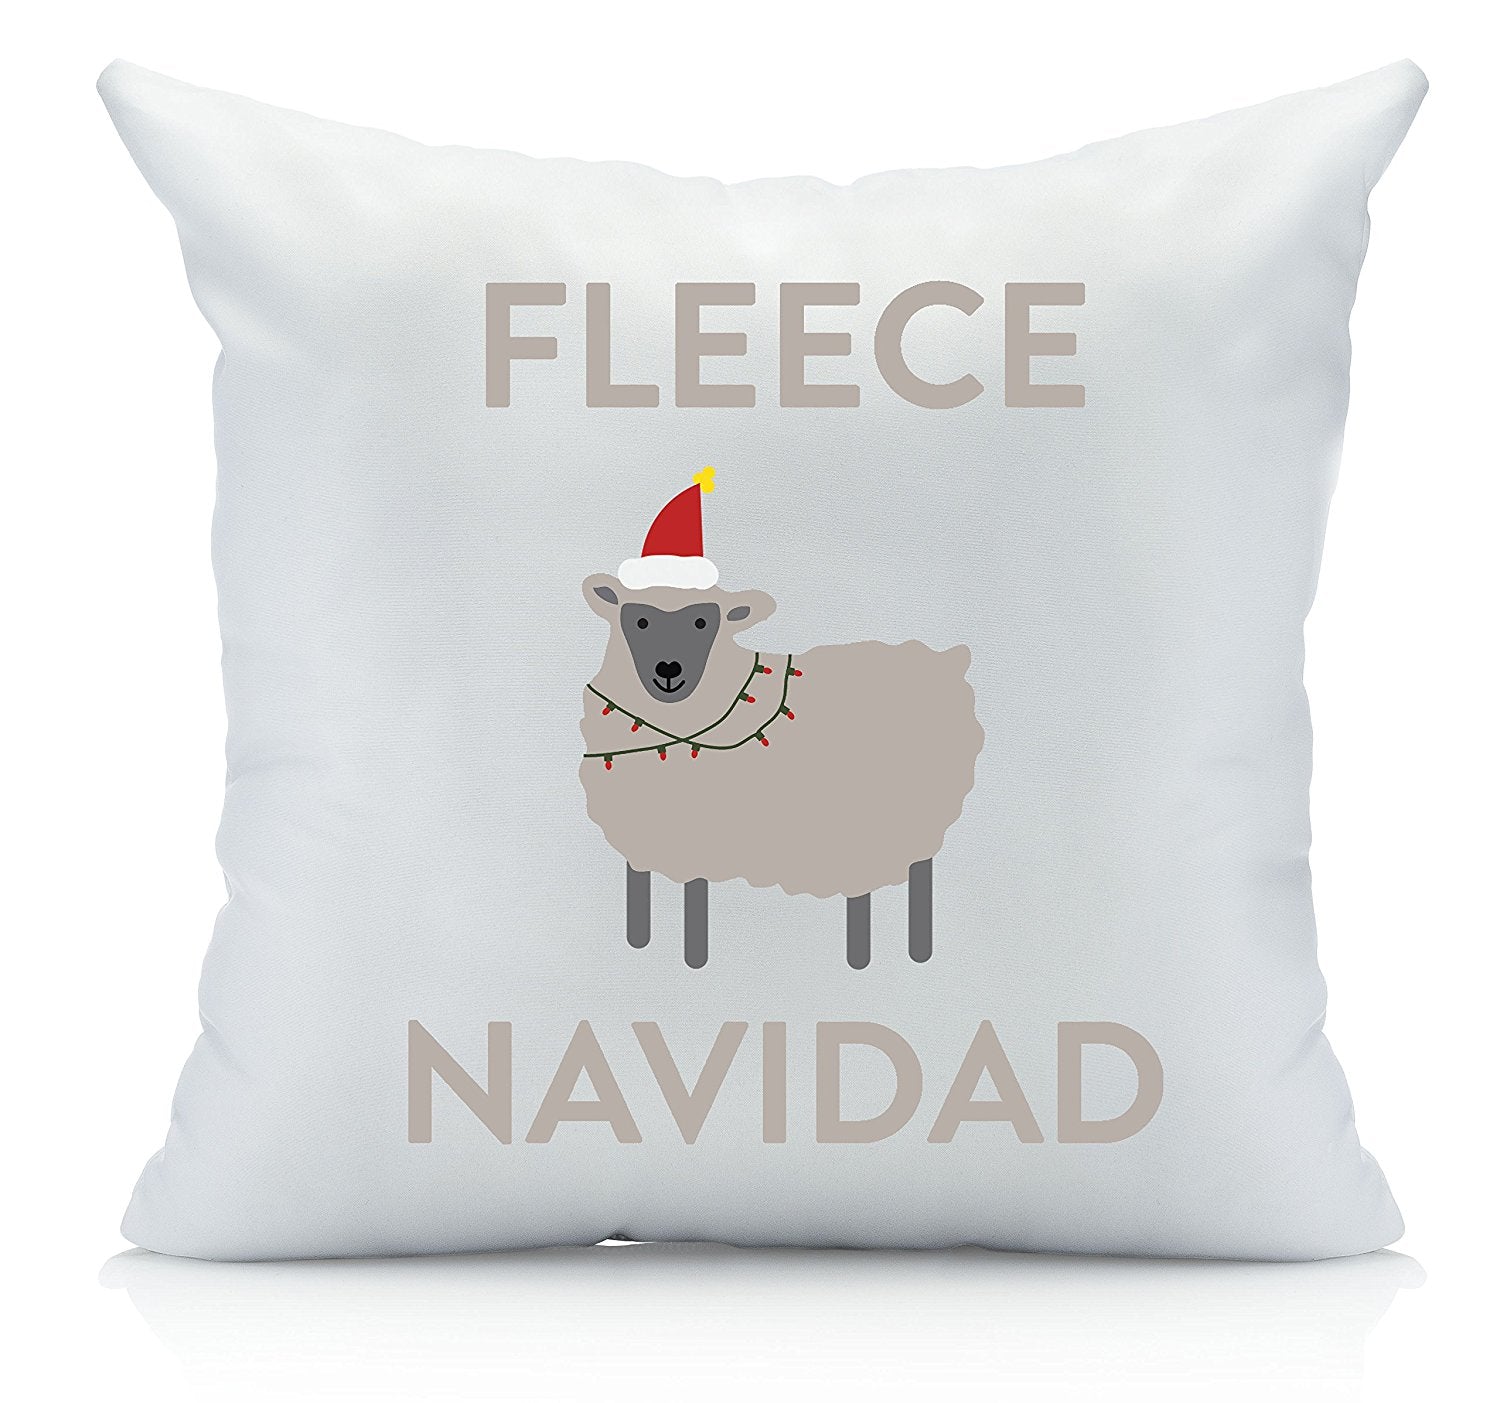 Fleece Navidad Christmas Throw Pillow Cover Multicolor (1 18 by 18 Inches) Christmas Gifts